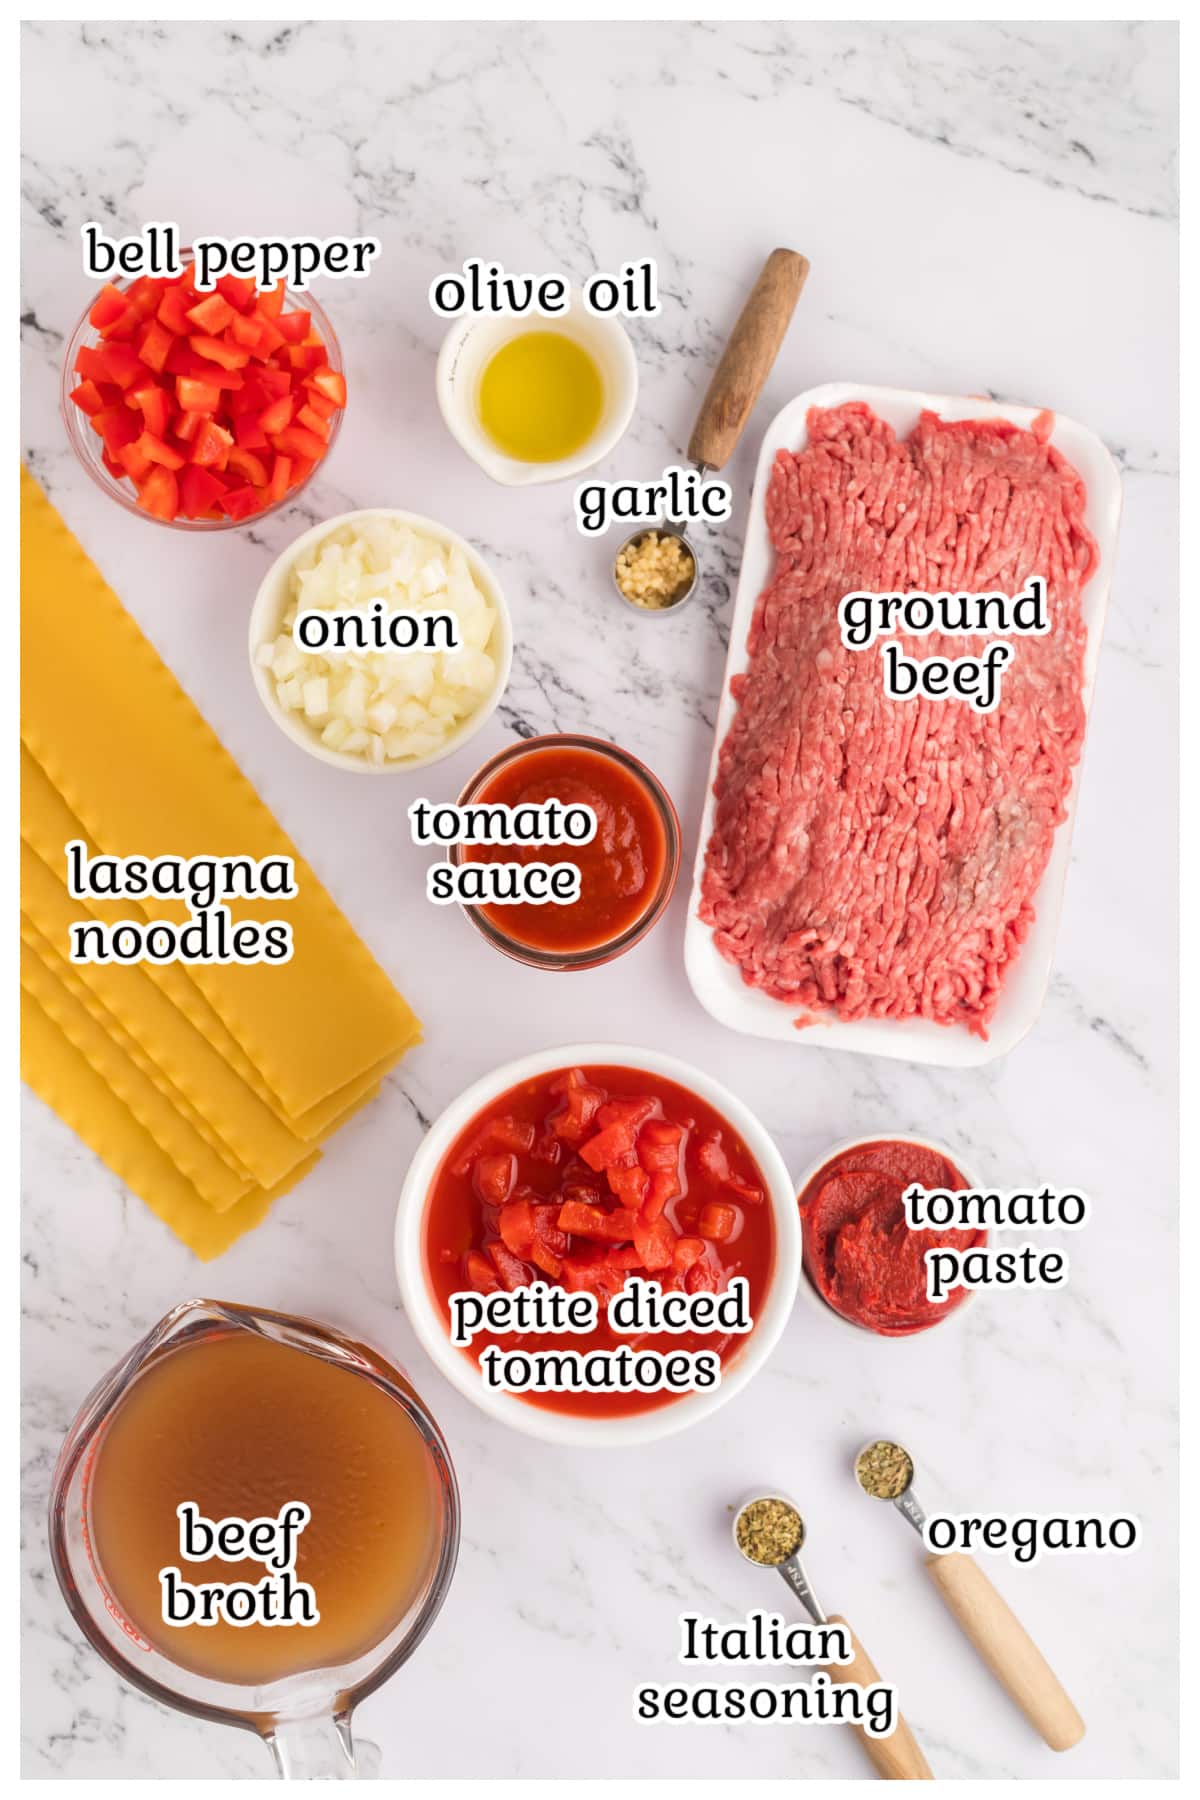 Ingredients for slow cooker lasagna soup on countertop.